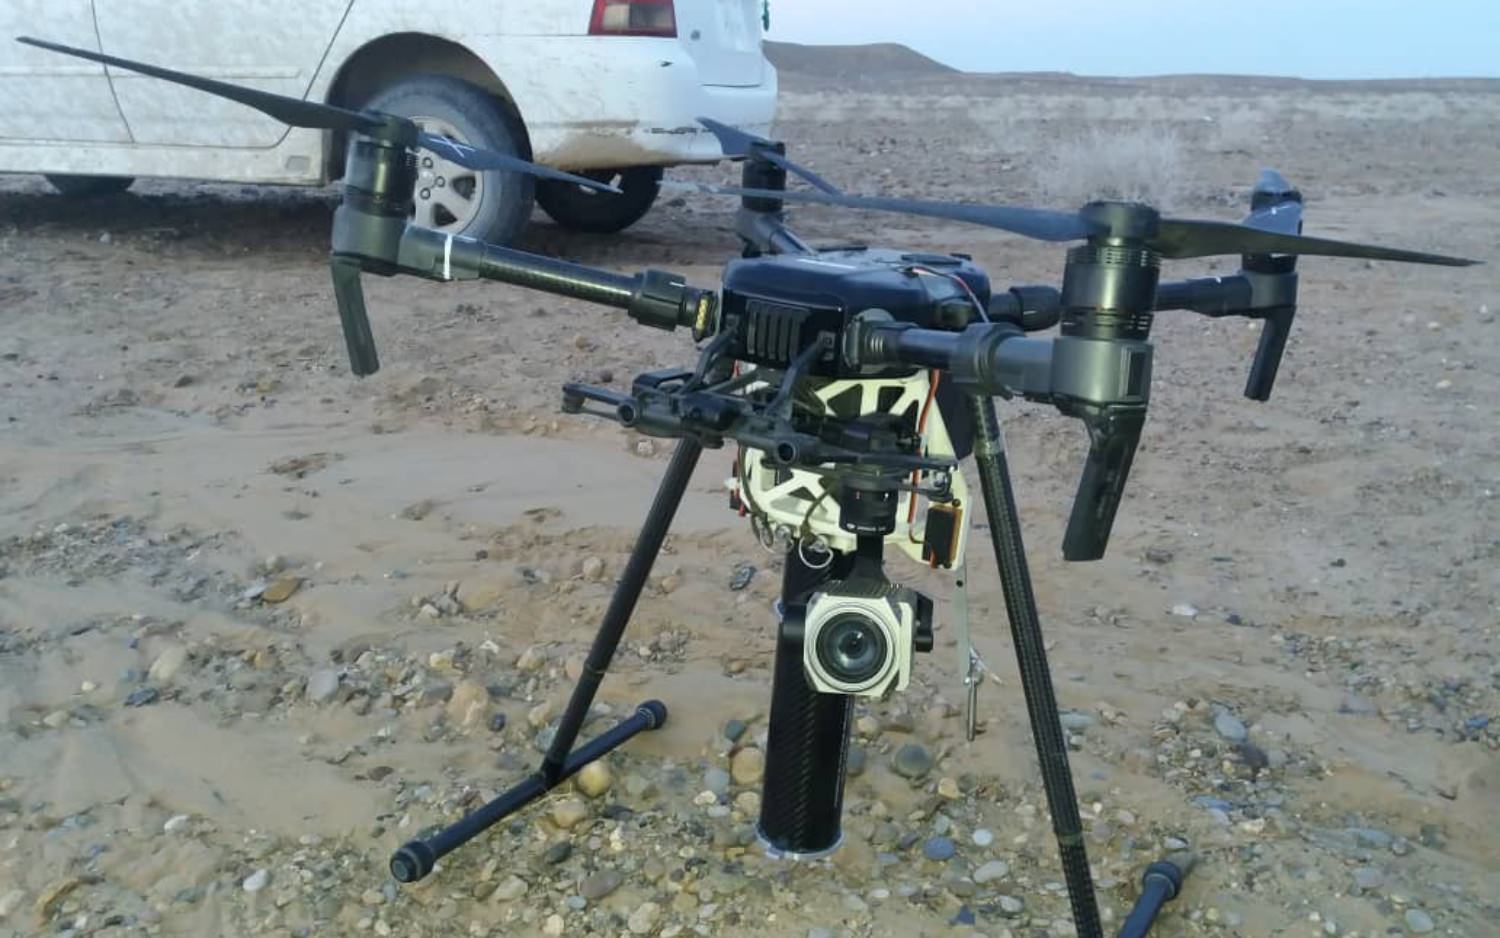 Taliban seize weaponized DJI Matrice 200 from Afghan security forces